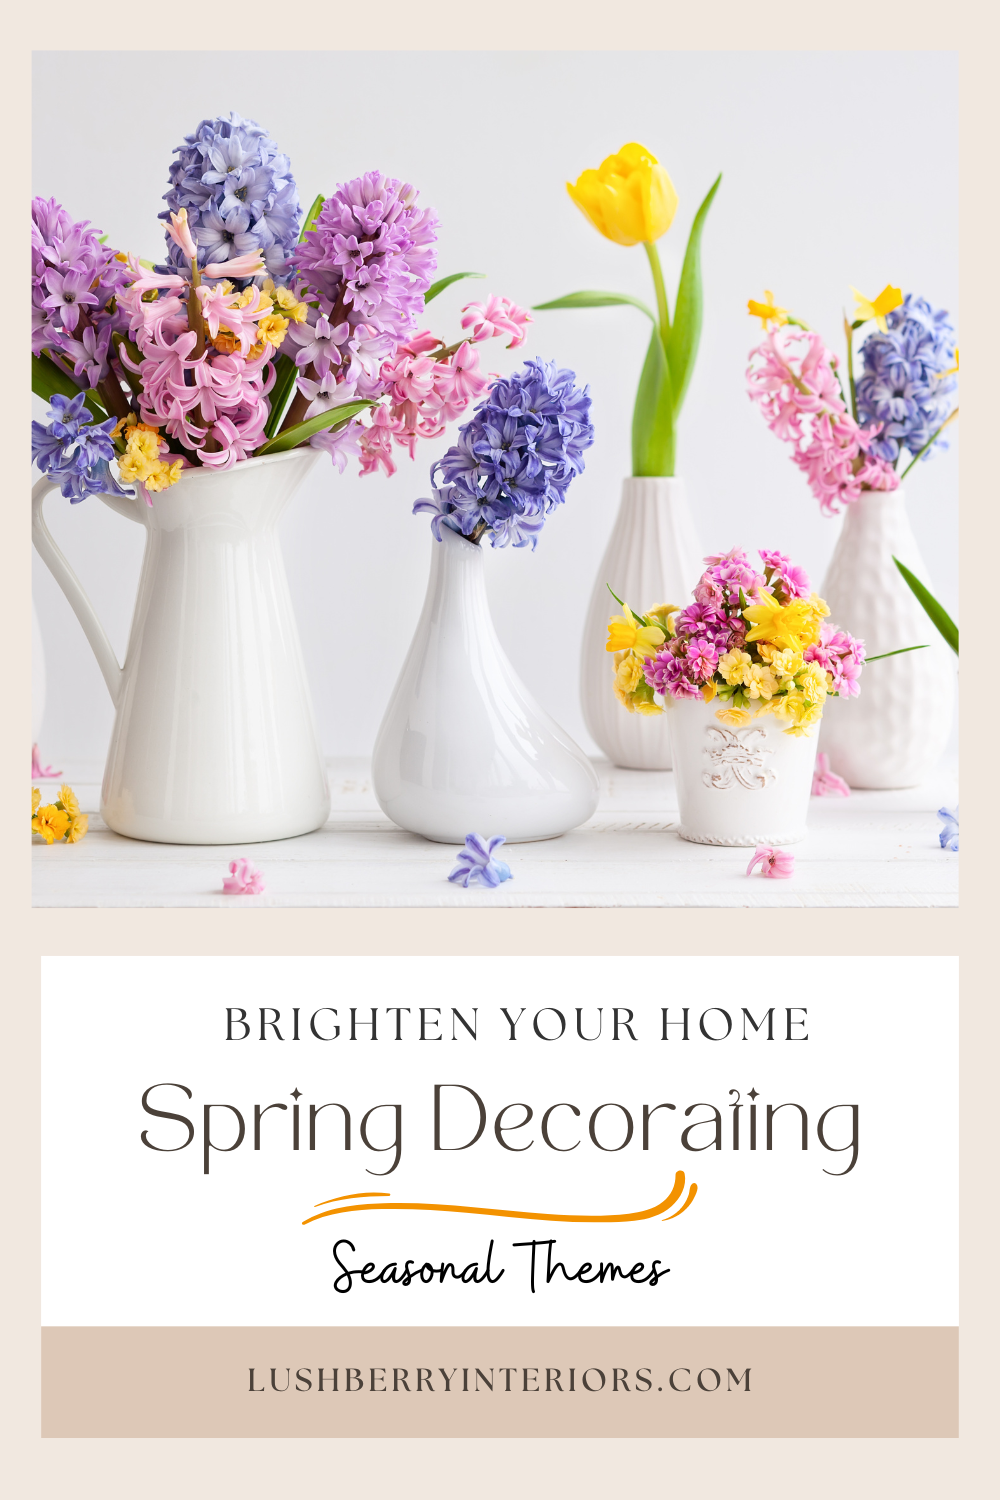 Spring Decorating Ideas to Brighten Your Home